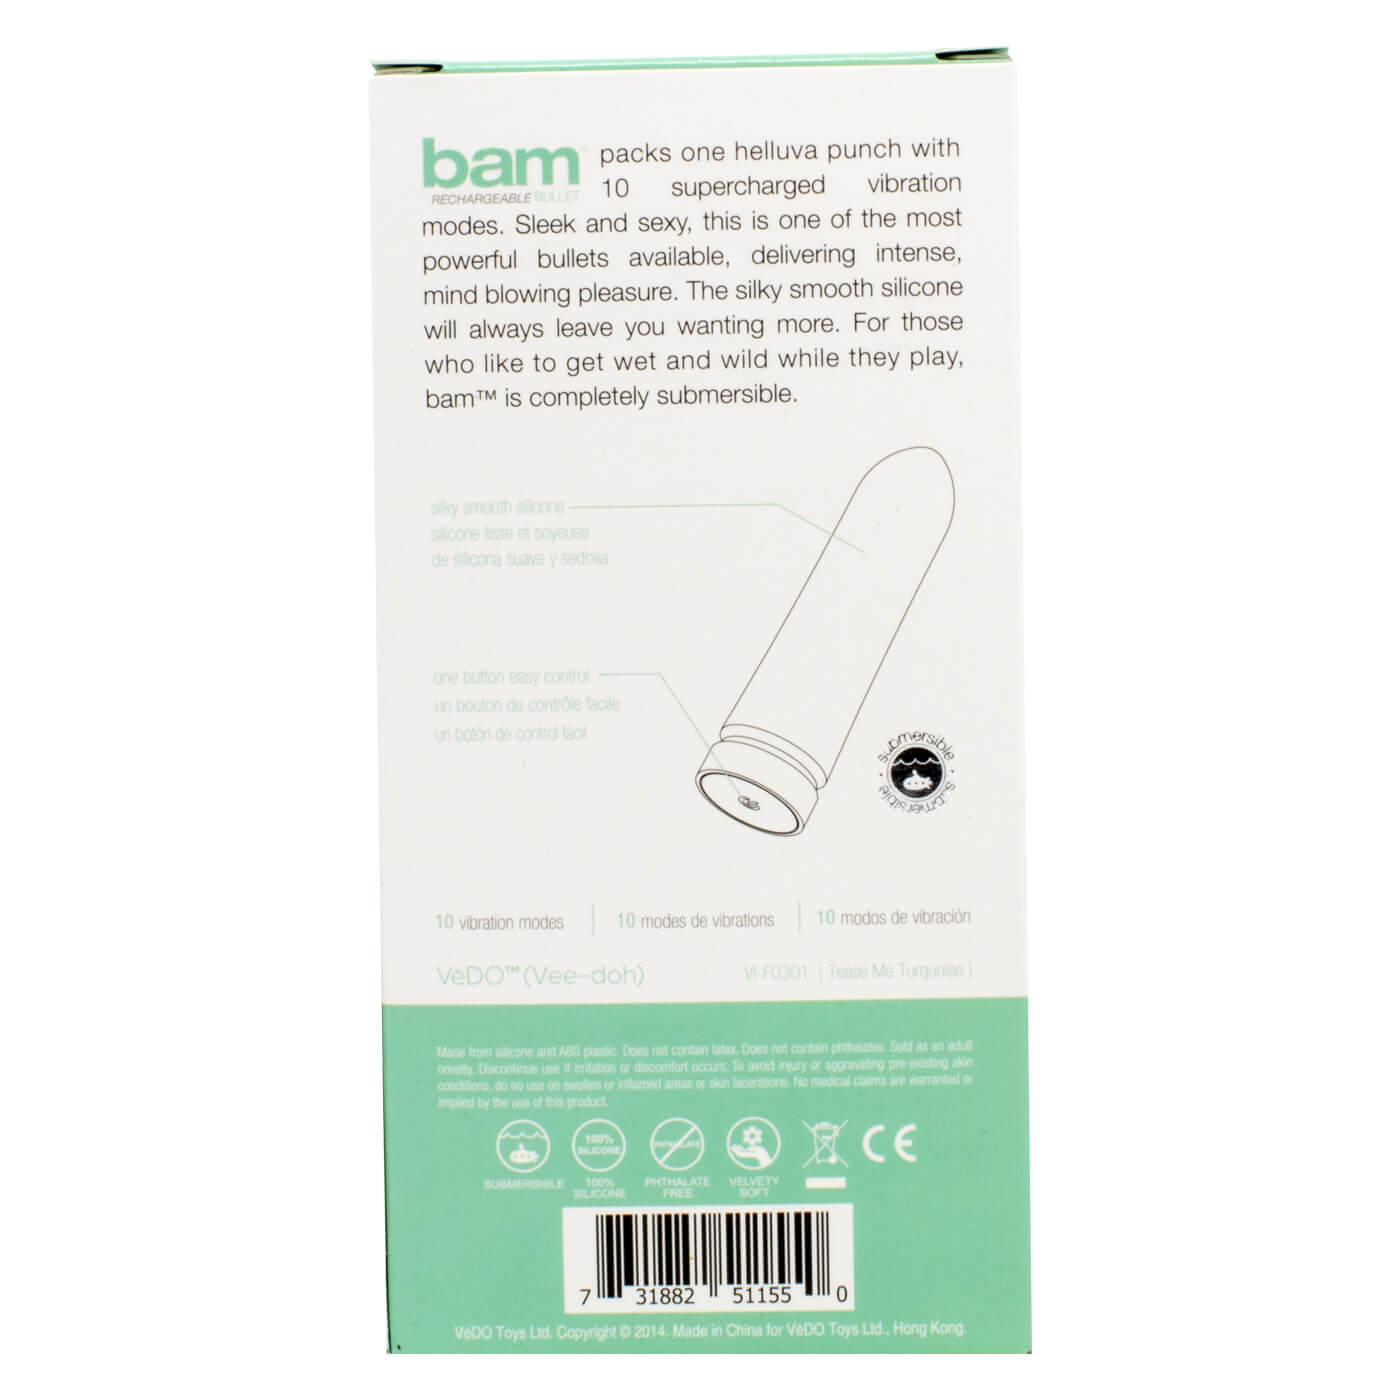 Vedo Bam Extra Powerful 10 Function USB Rechargeable Bullet Vibrator